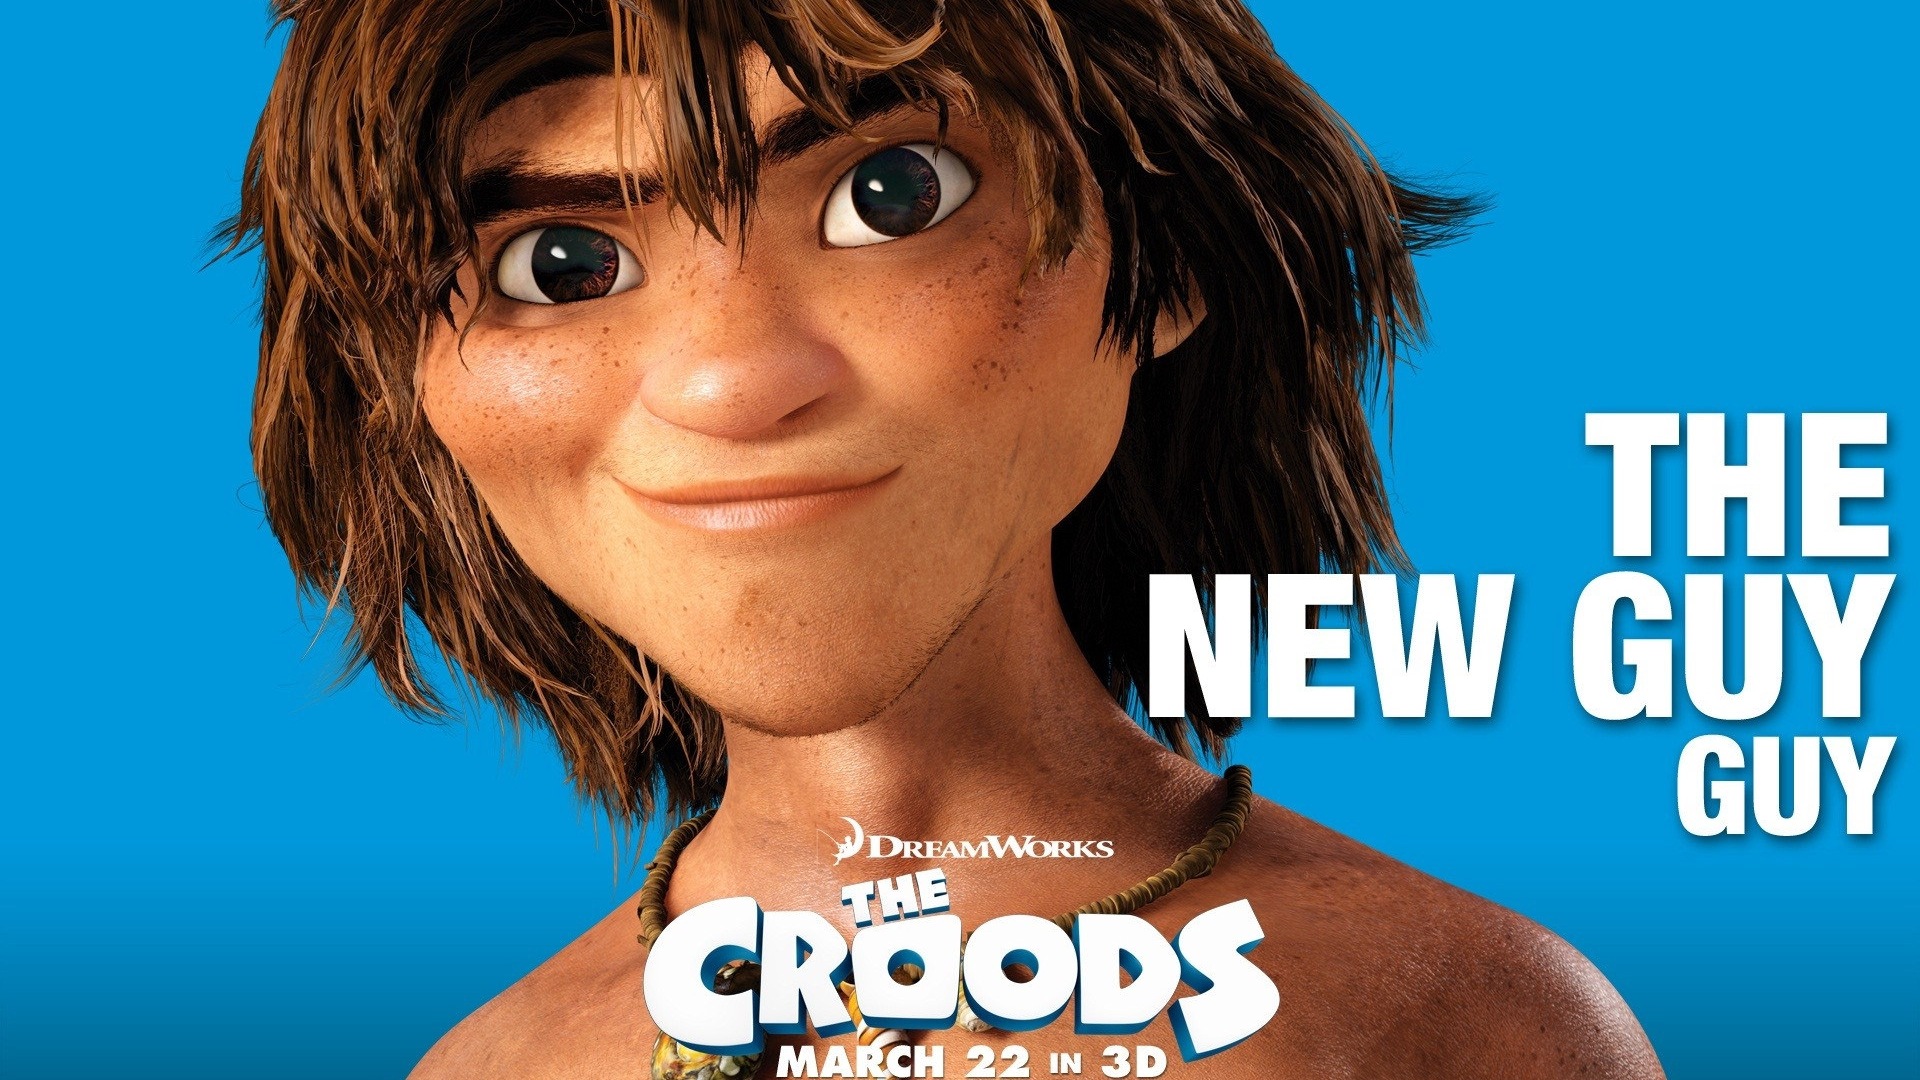 The Croods HD movie wallpapers #8 - 1920x1080